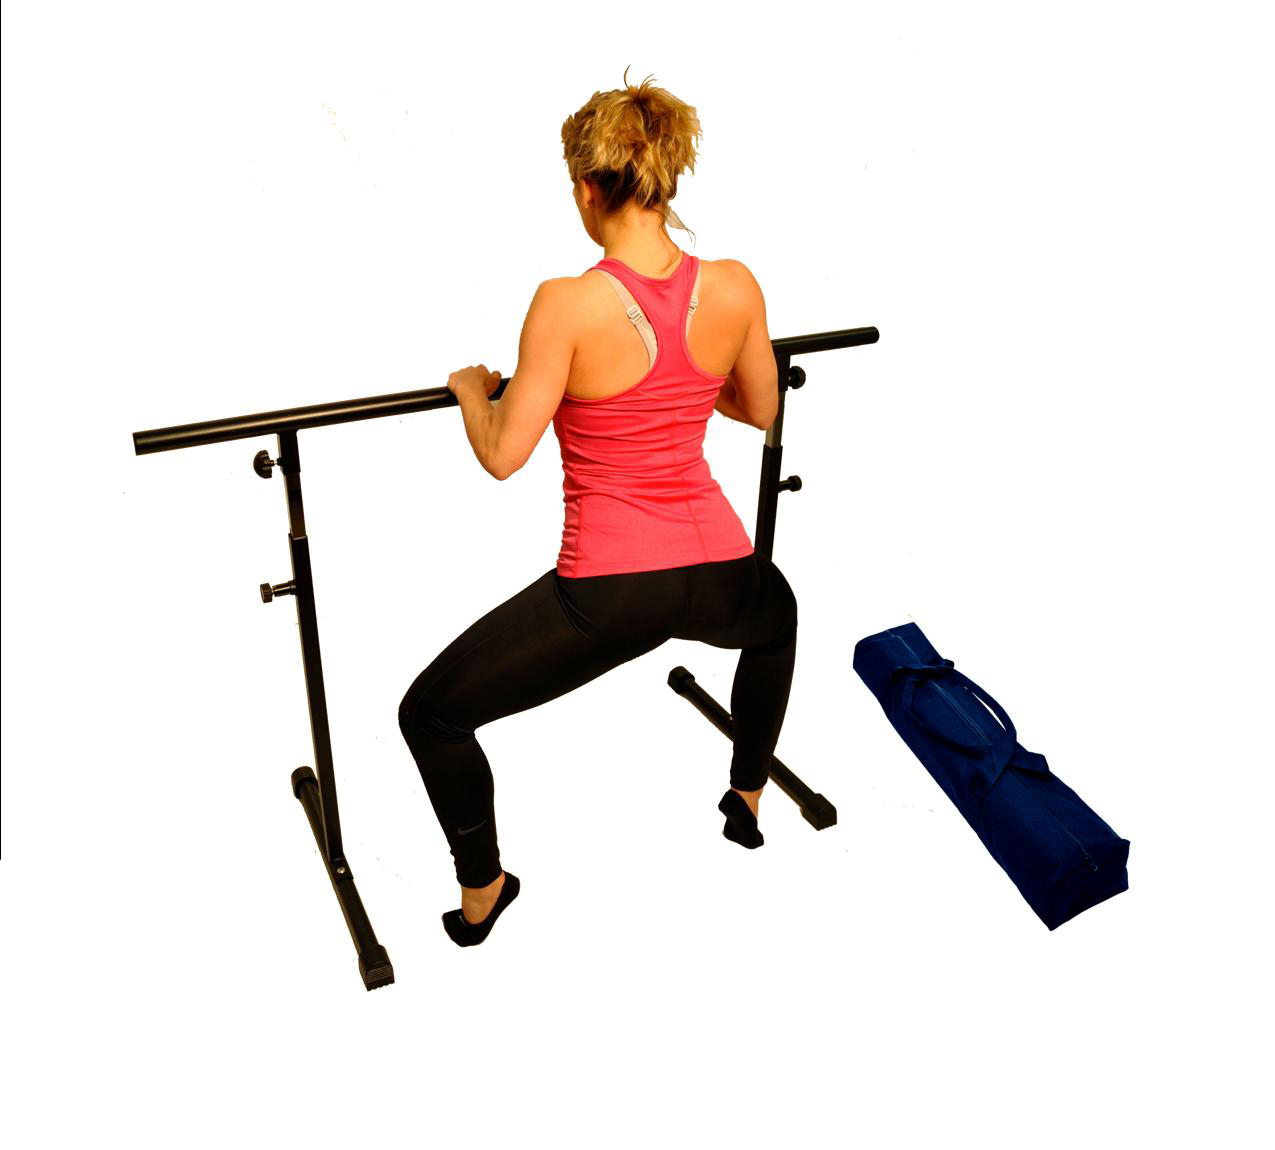 Free Standing Balance Barre With Travel Bag